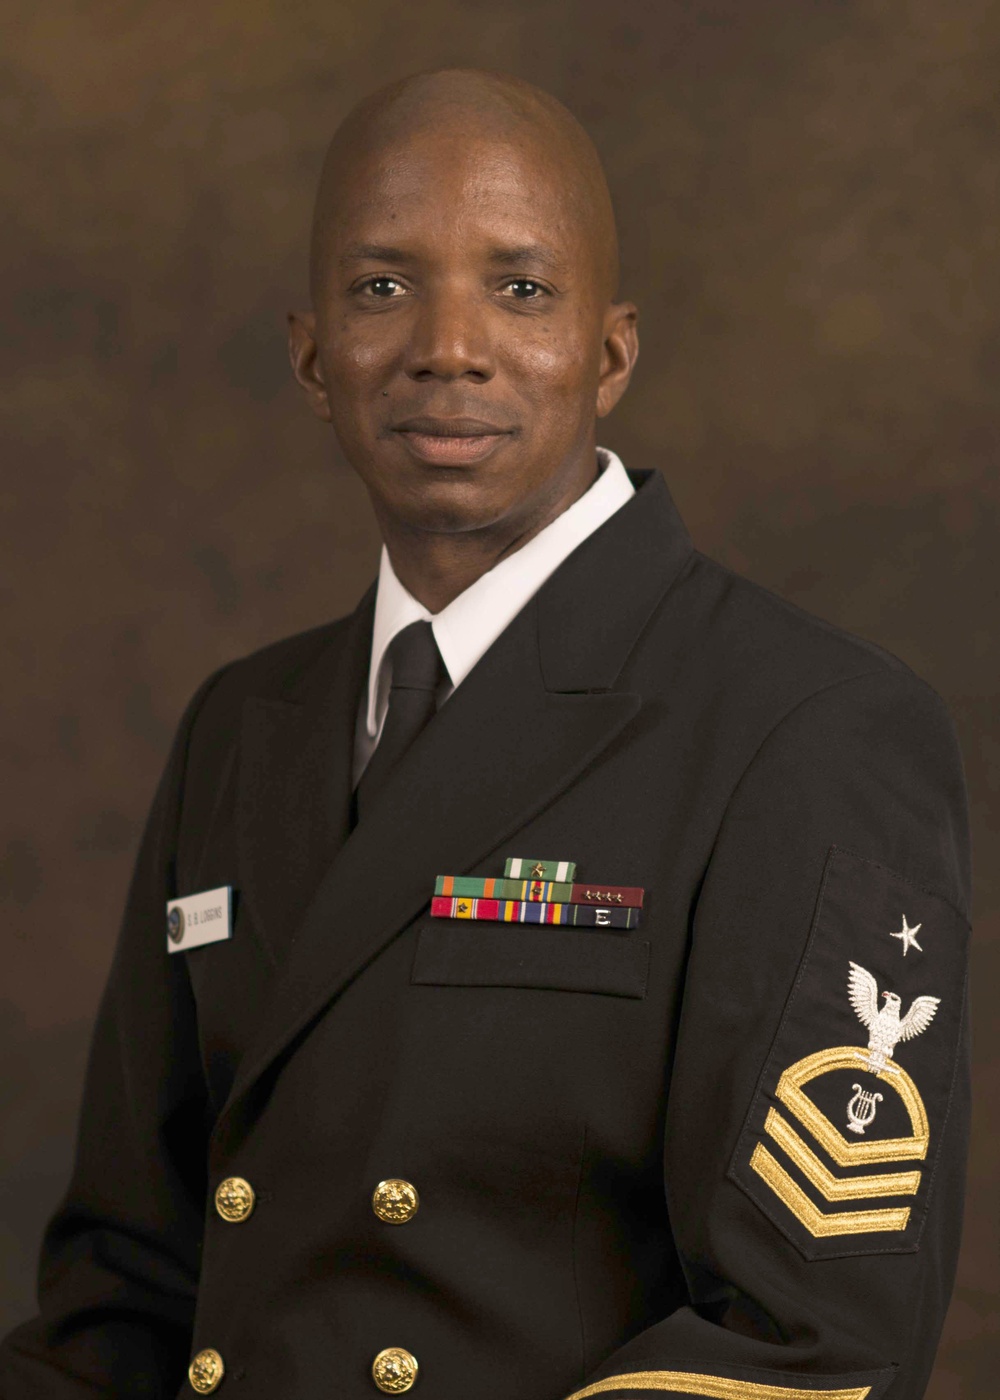 Navy Senior Chief Petty Officer Loggins supports the 58th Presidential Inauguration